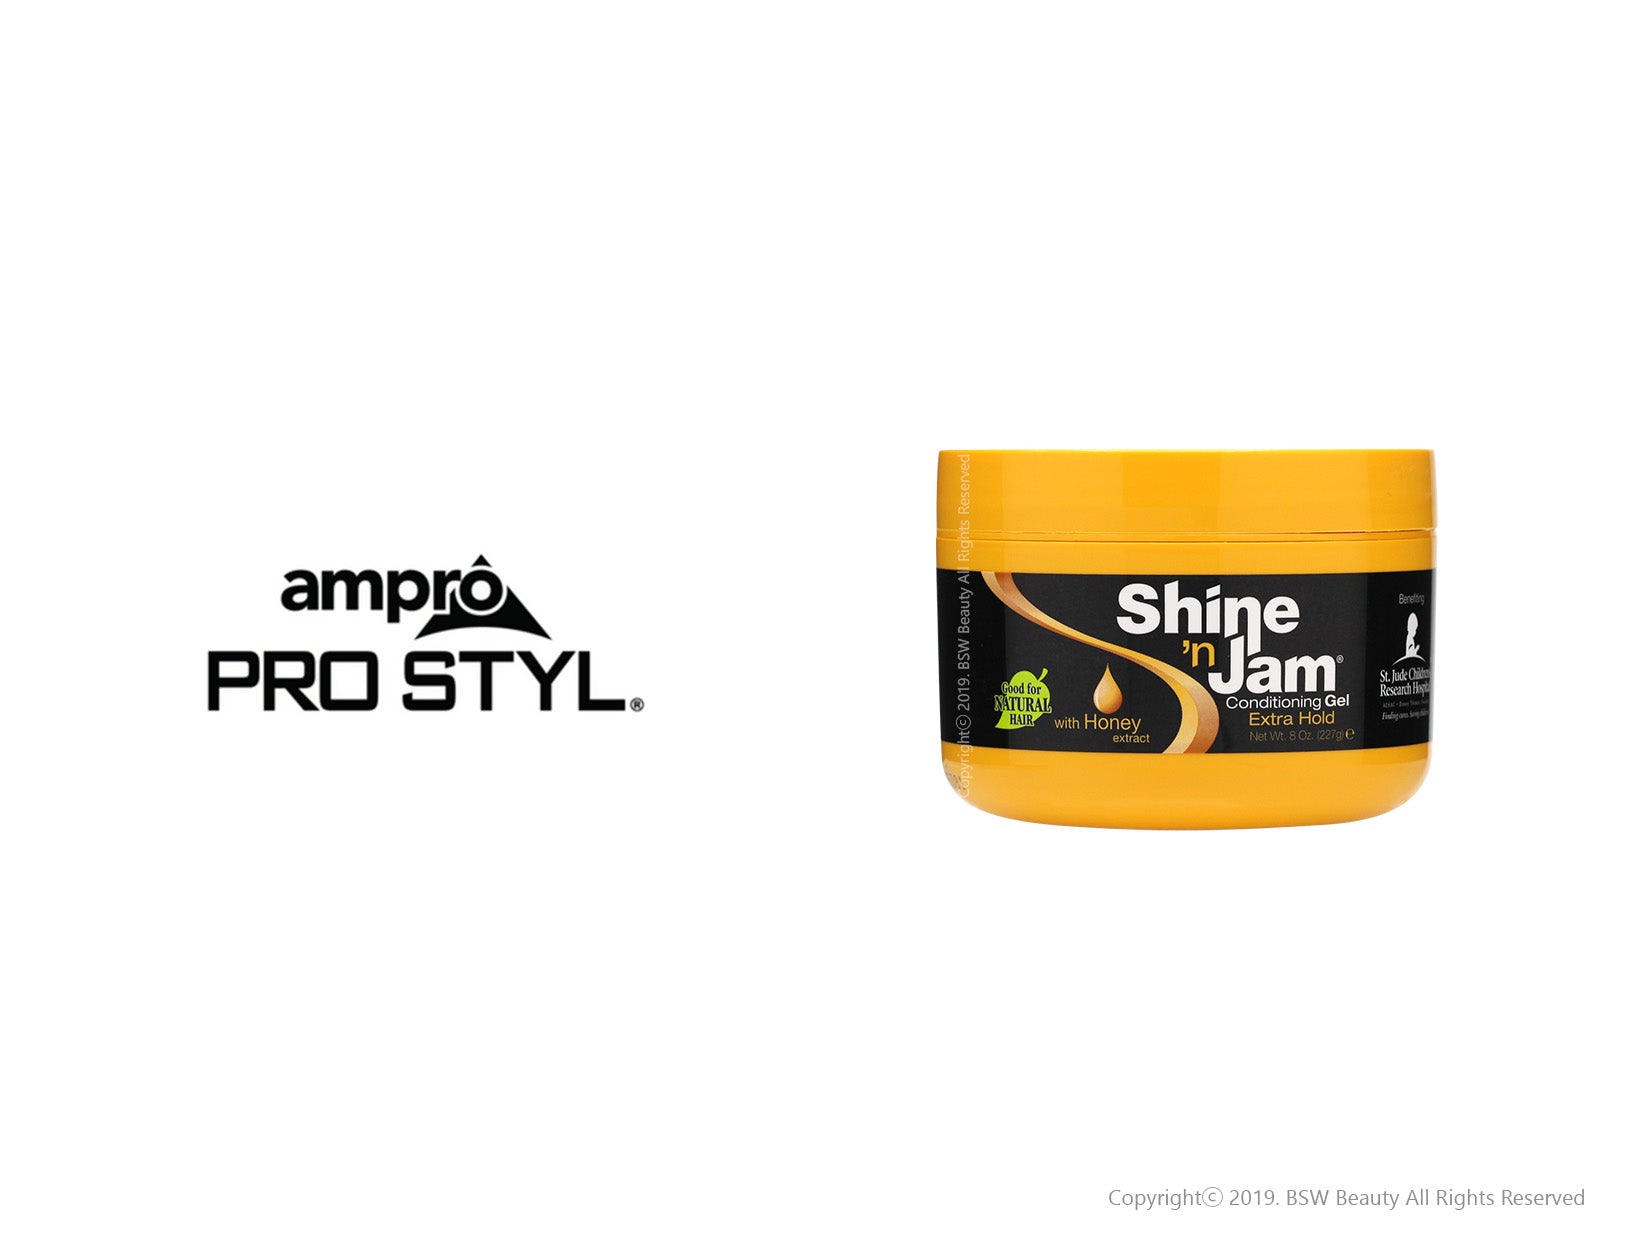 Ampro Pro Style Shine N Jam Conditioning Gel Extra Hold 3 Size Bsw Beauty Canada